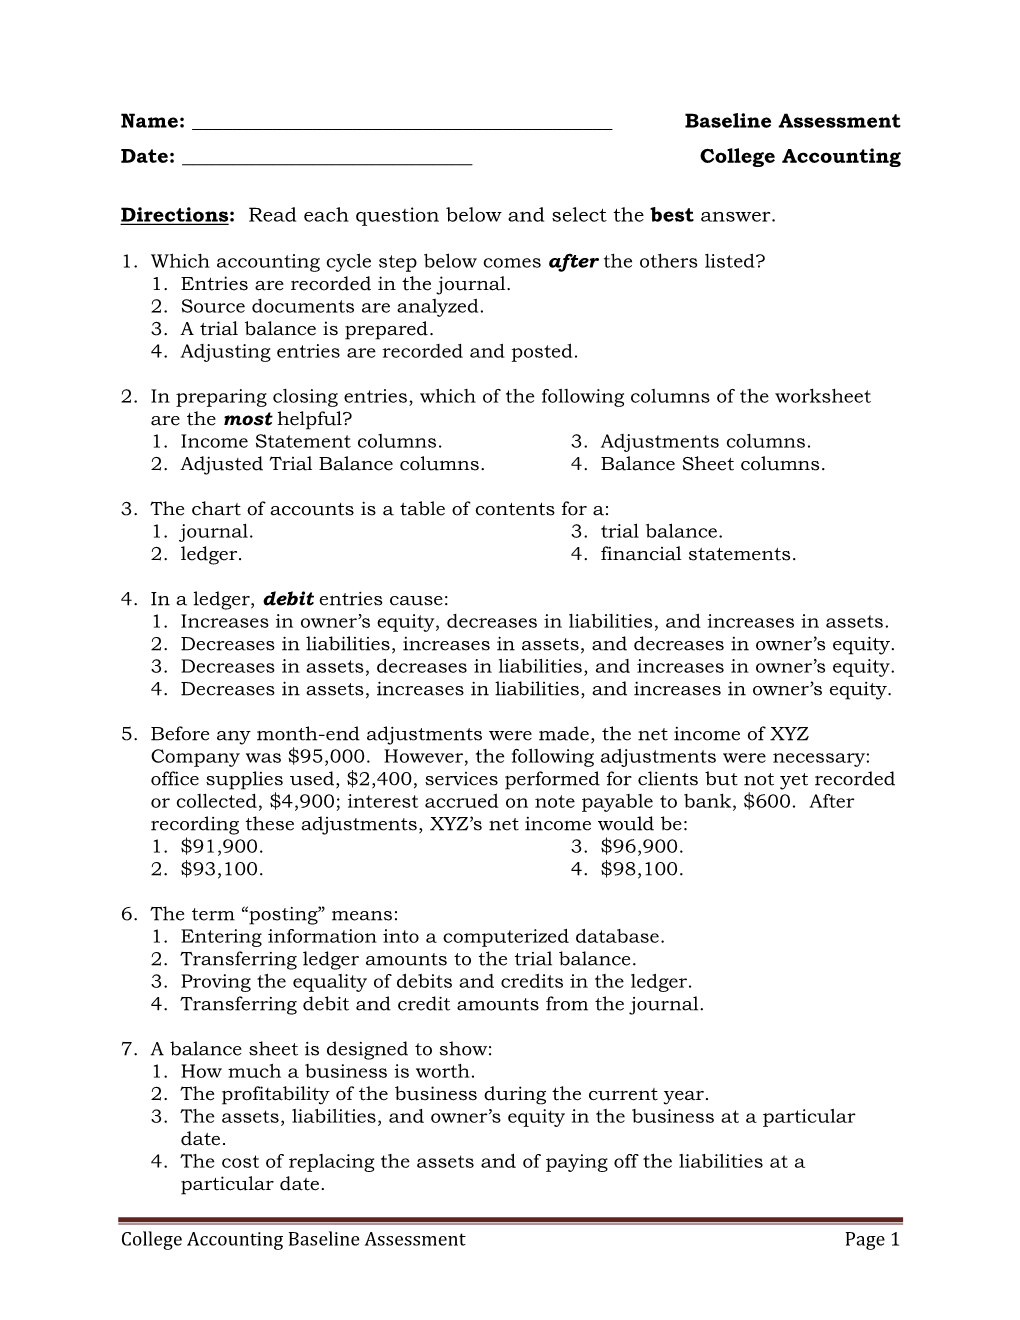 College Accounting Baseline Assessment Page 1 Name